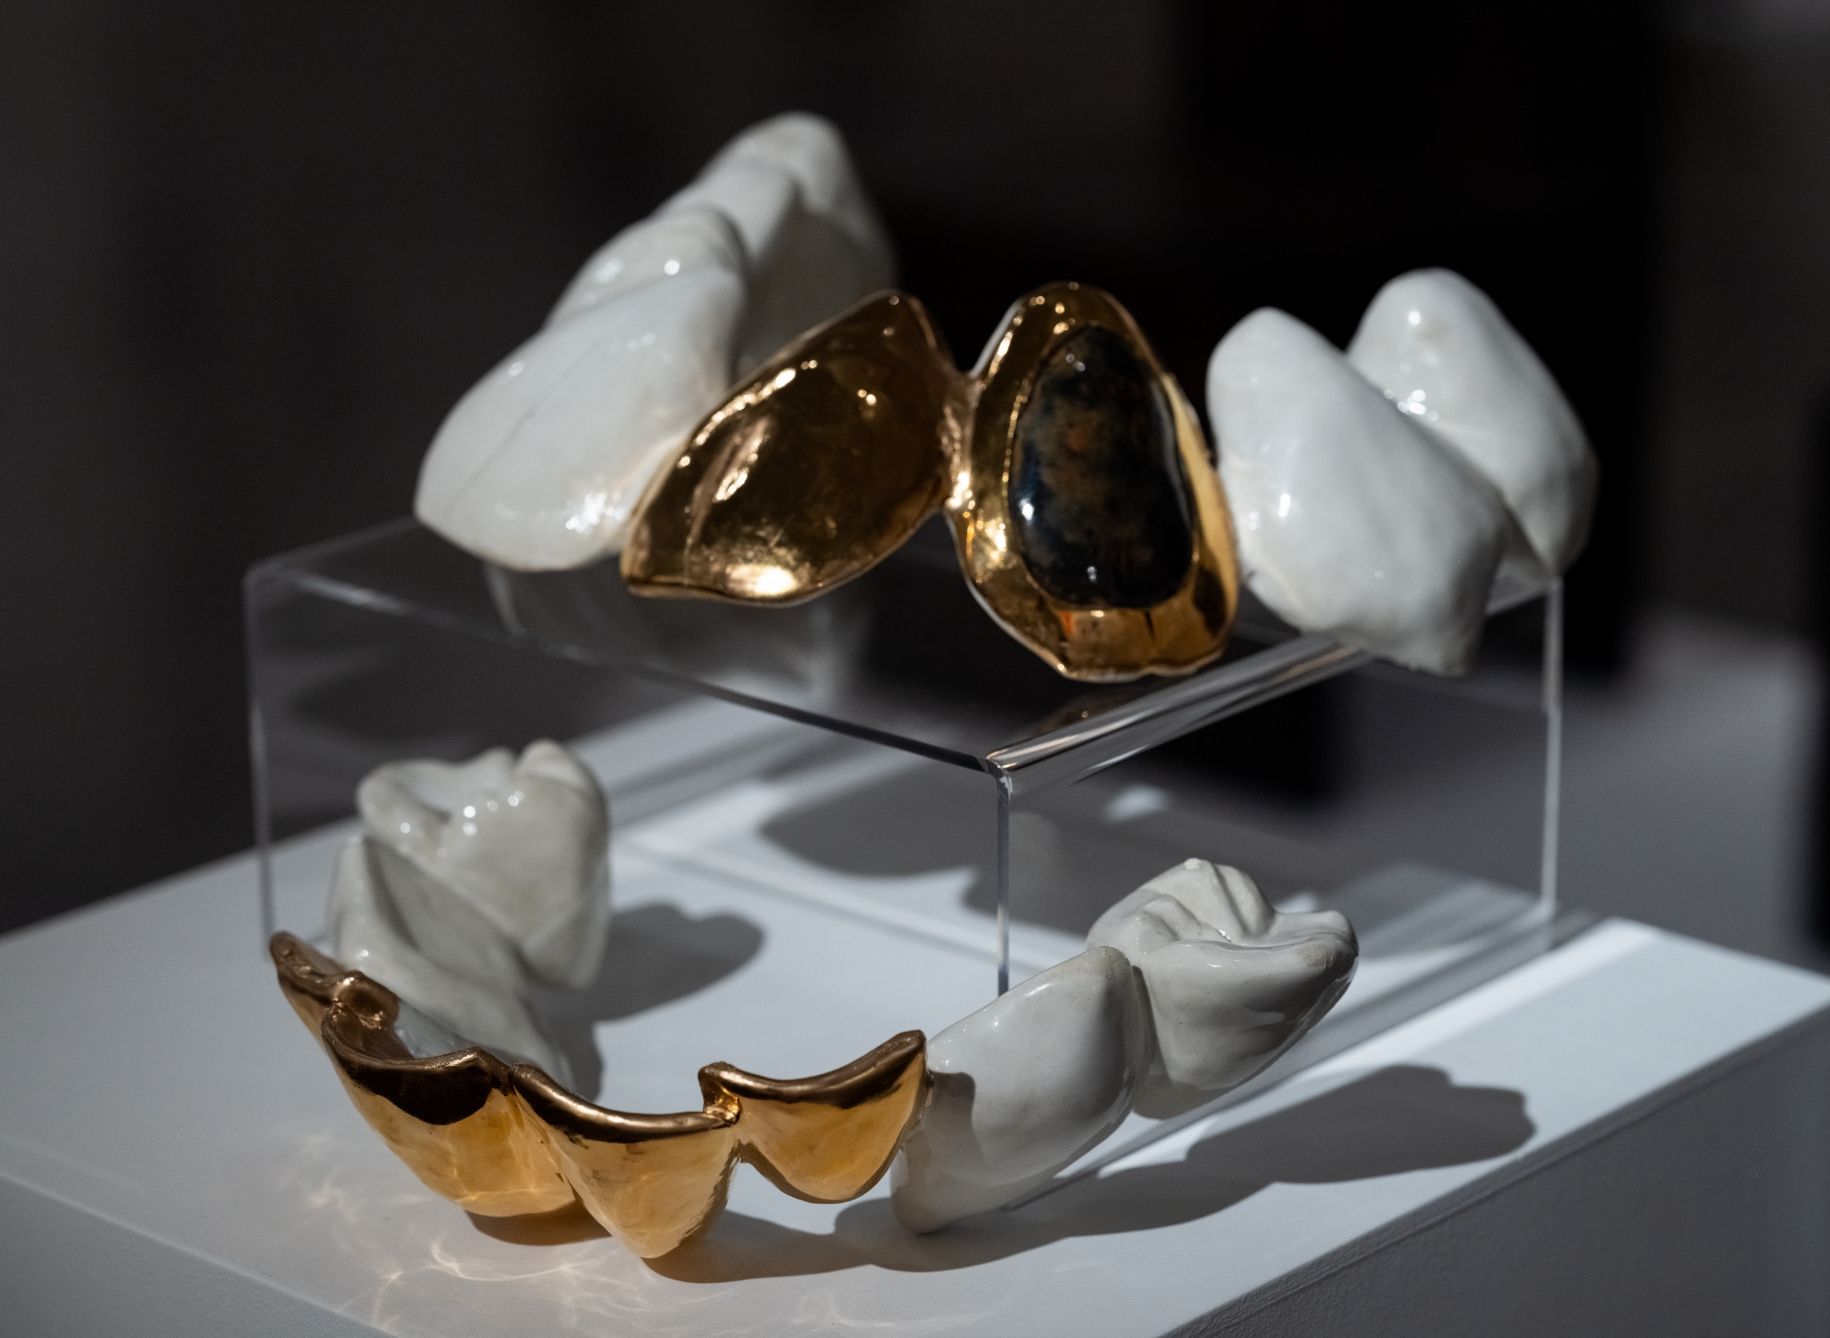 A pair of gold and white teeth on display.